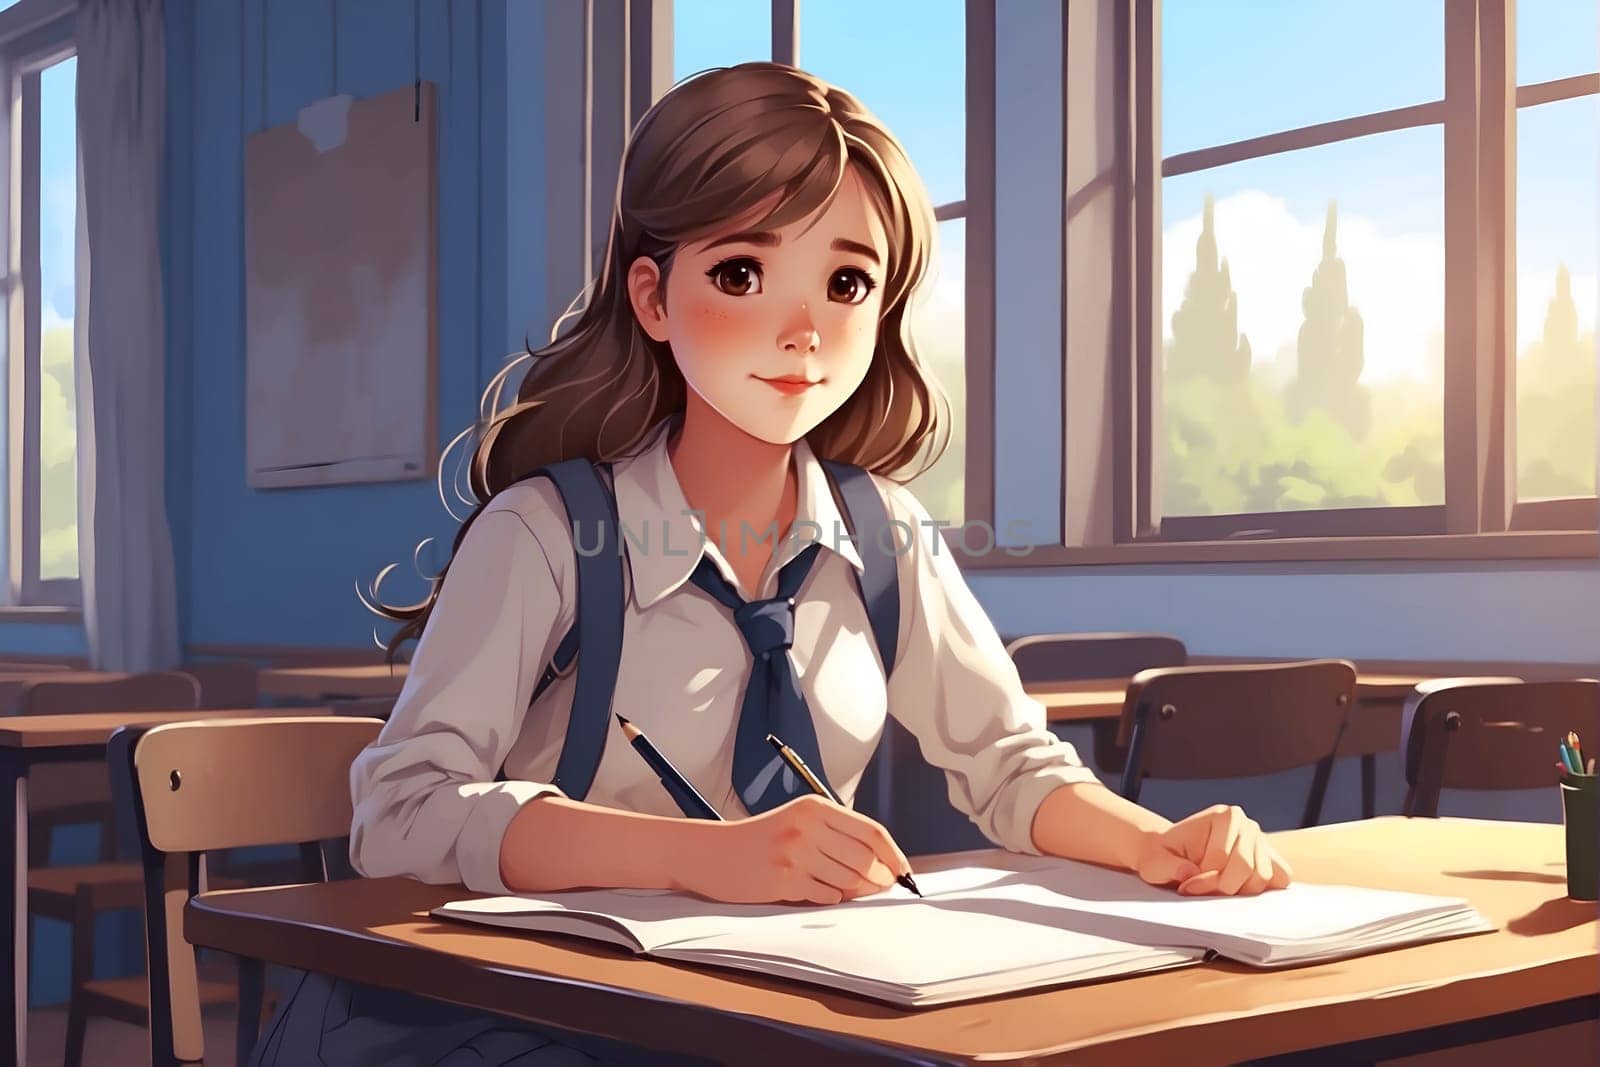 A young girl is sitting at a wooden desk, focusing intently as she writes on a piece of paper.